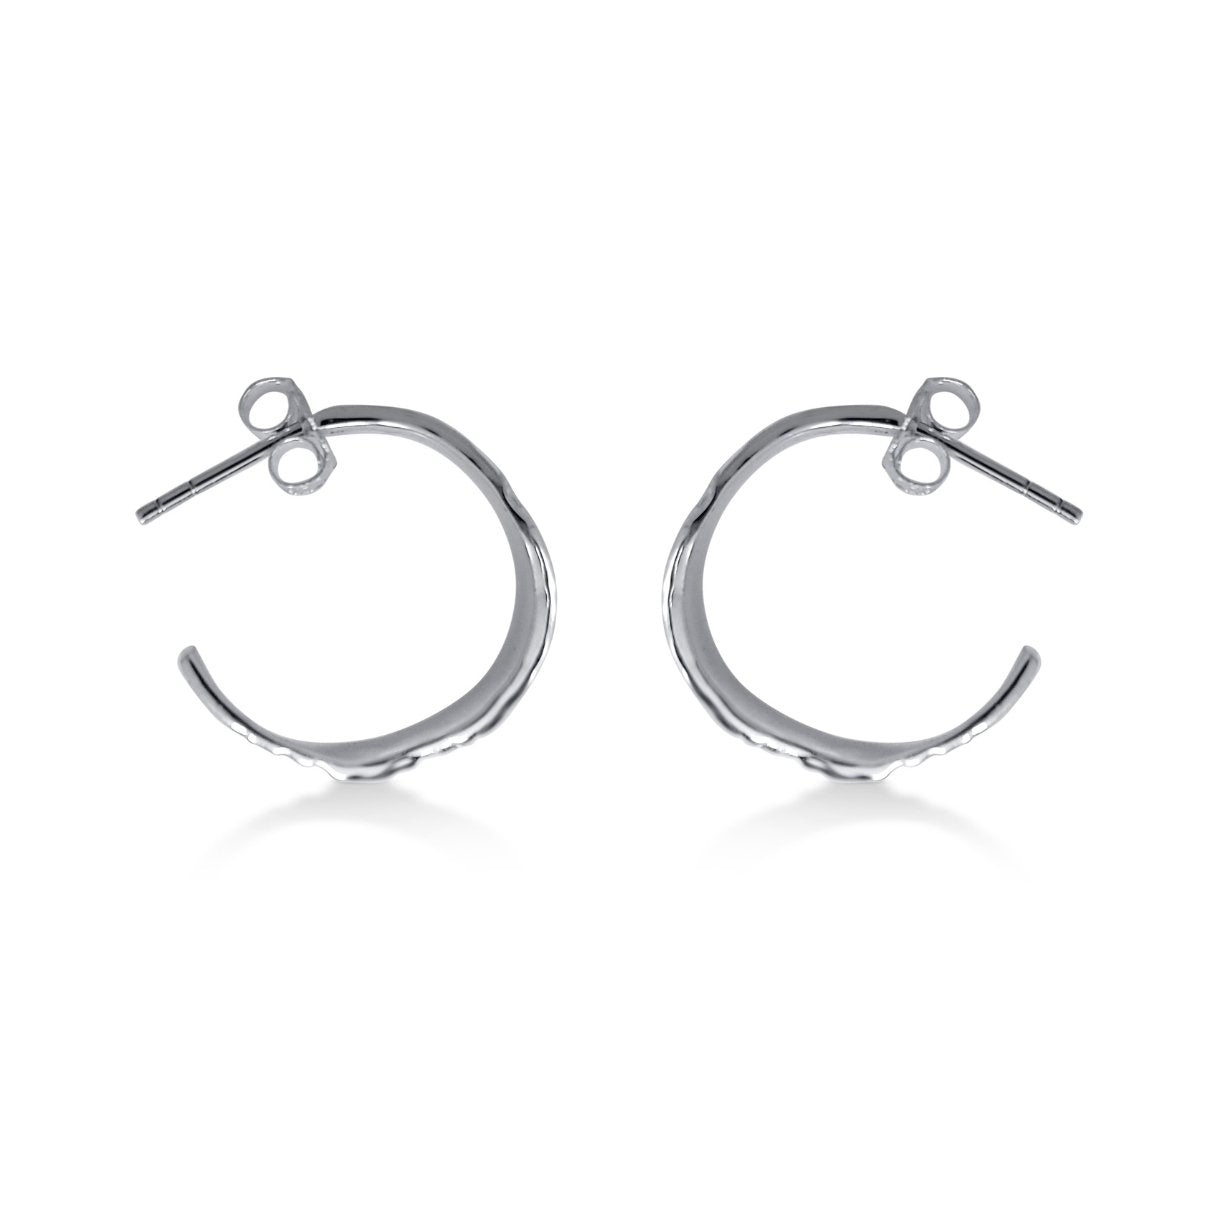 classic sterling silver hoops earrings with natural texture close up 